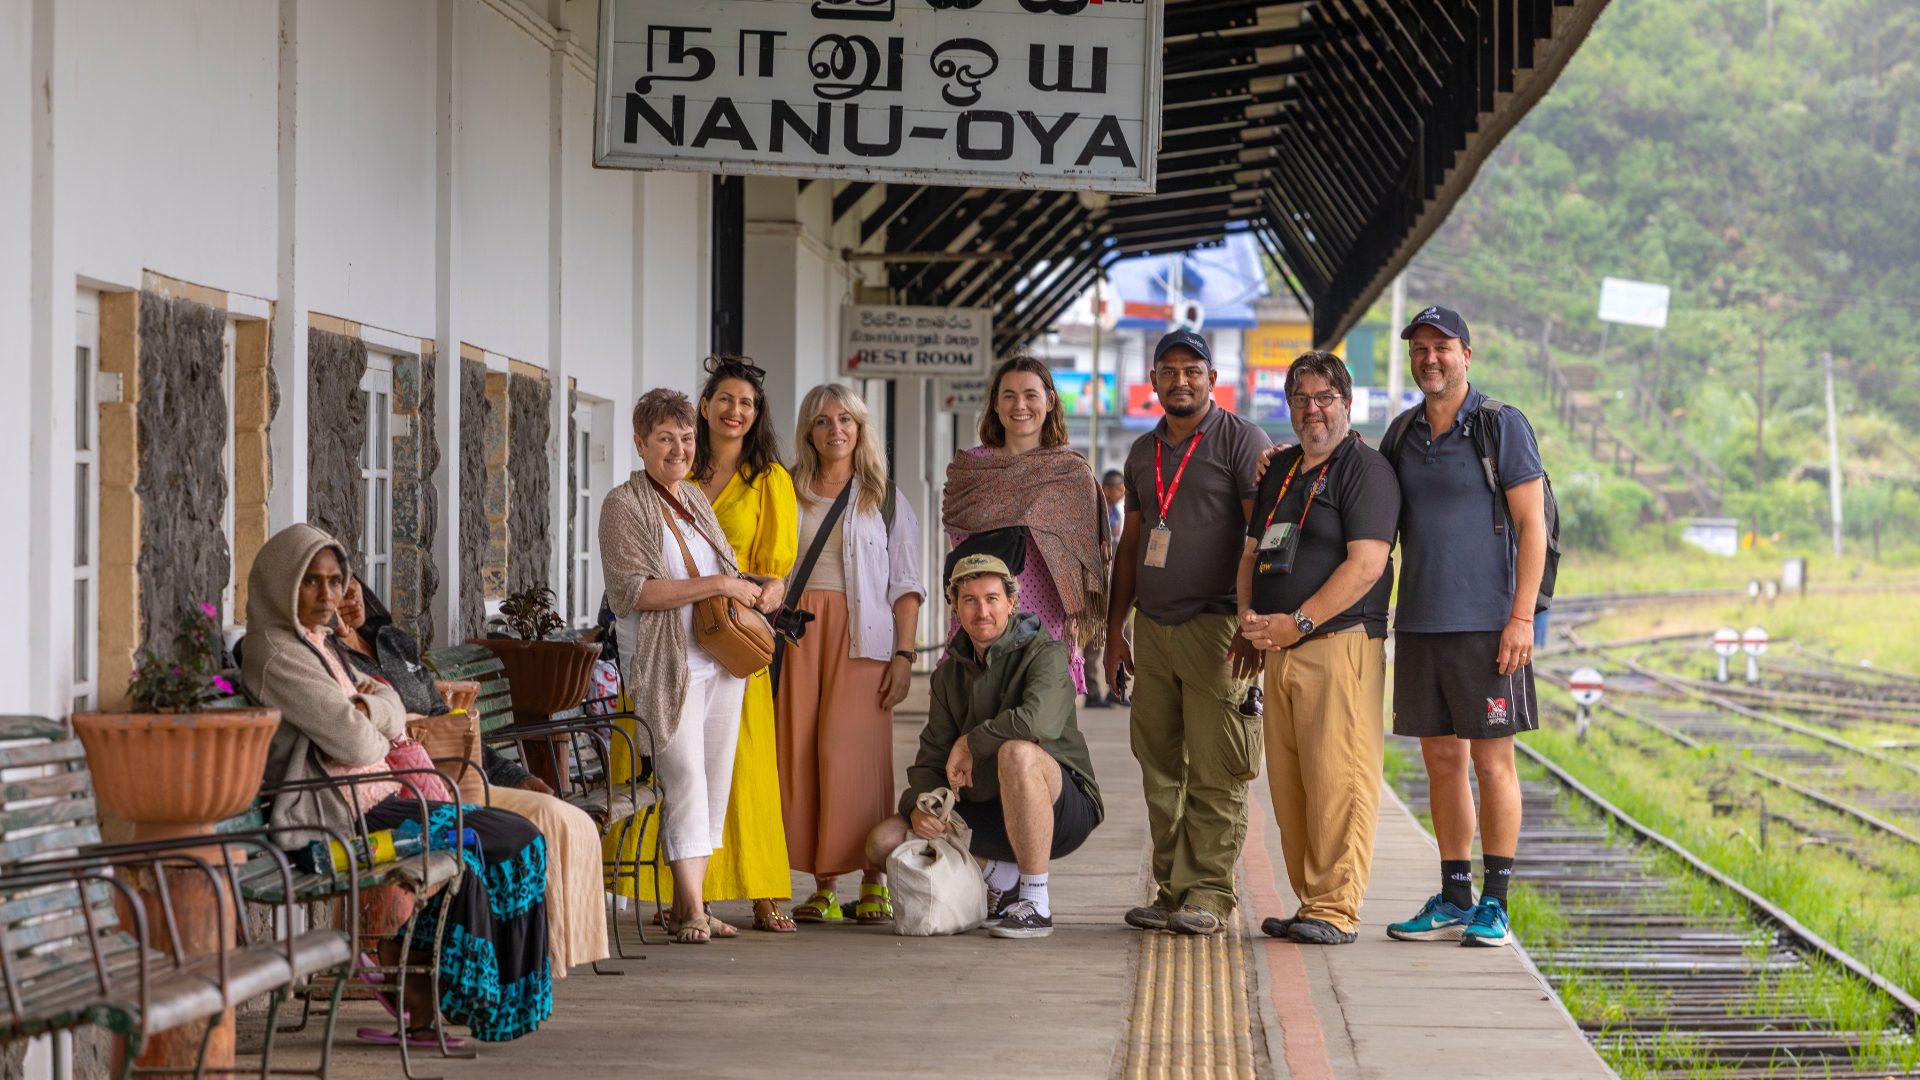 A group of smiling travellers at a train station in Sri Lanka.